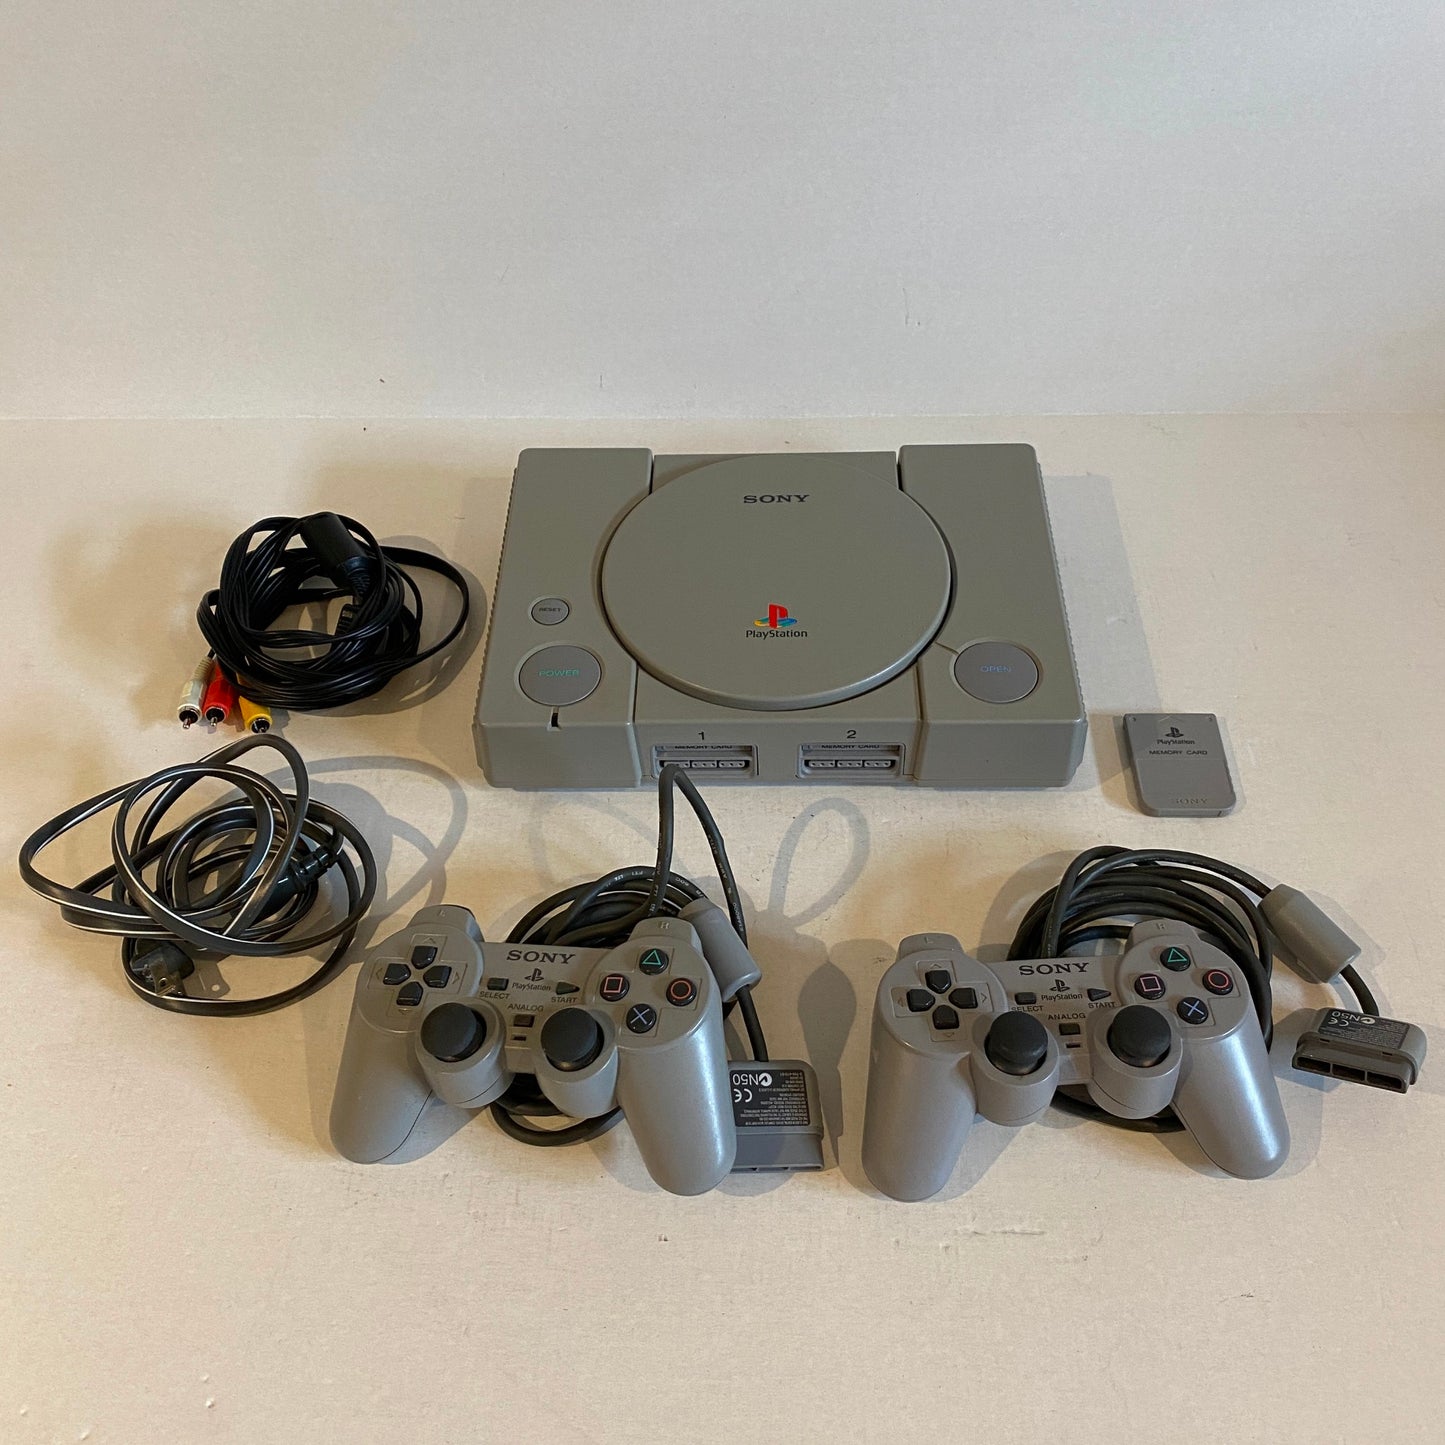 Sony Playstation PS1 - SCPH-7501